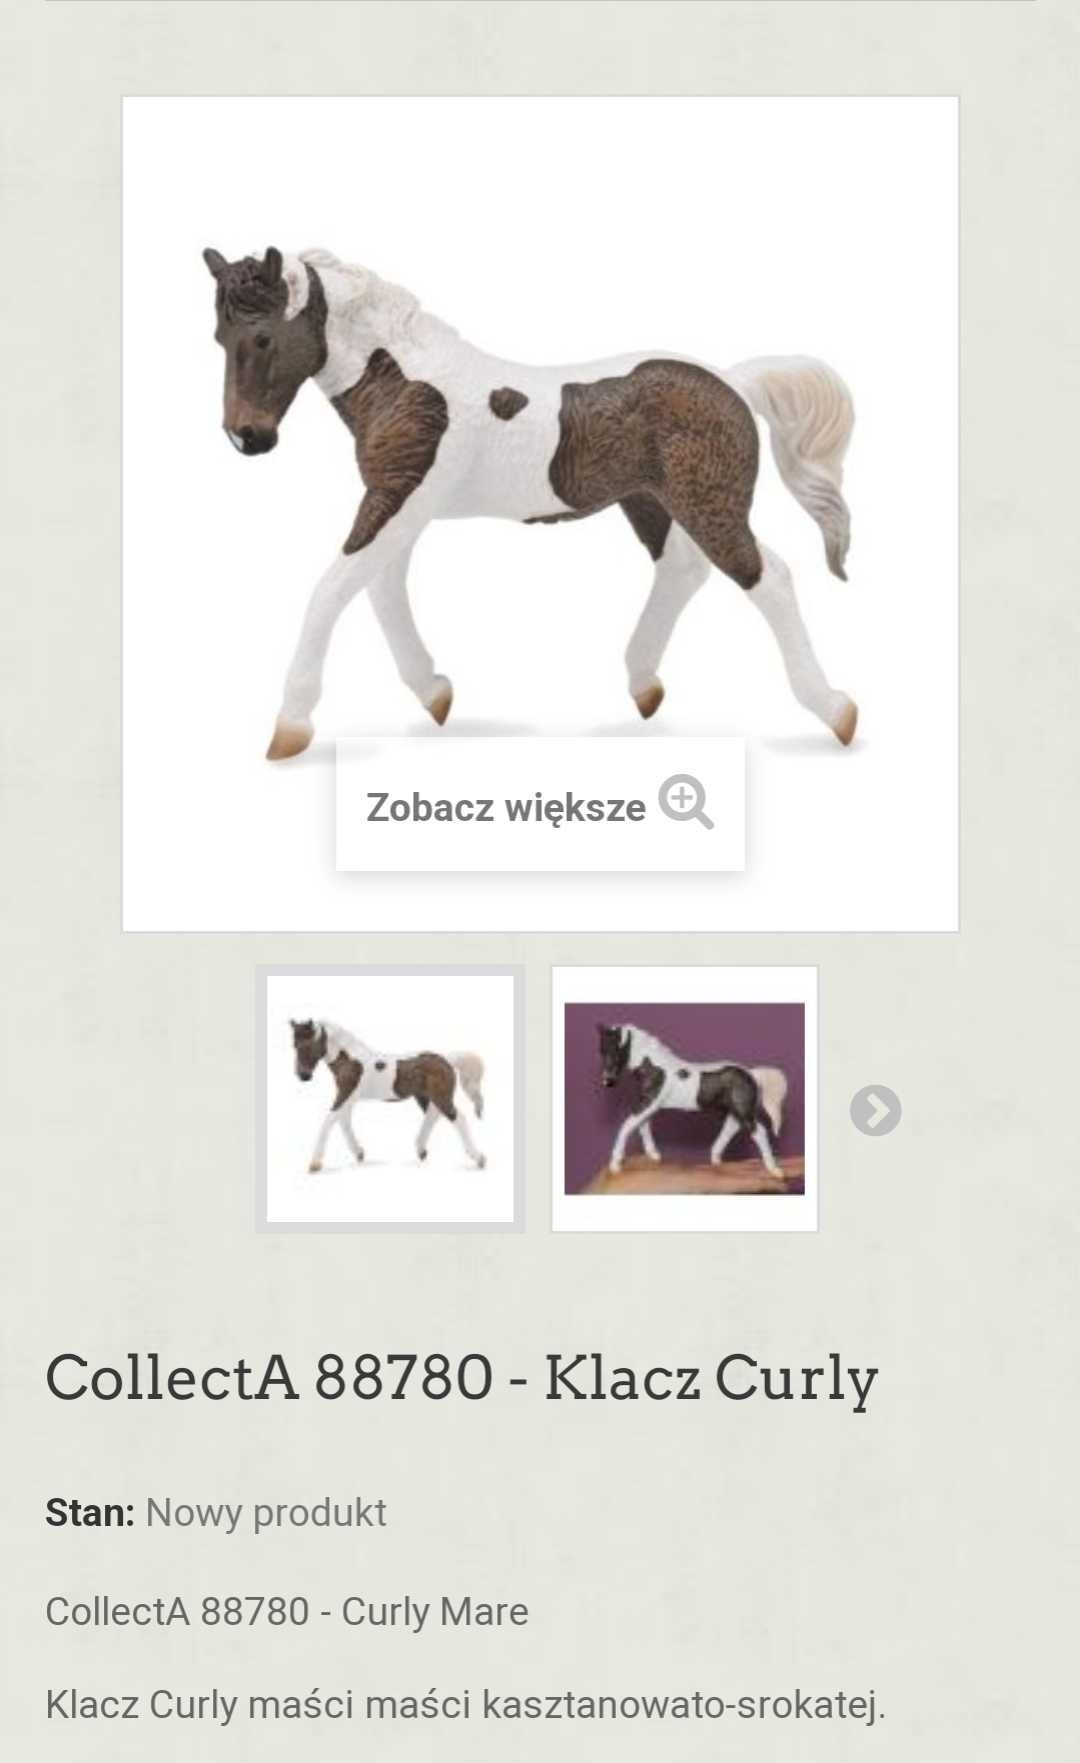 CollectA 88780 - Klacz Curly